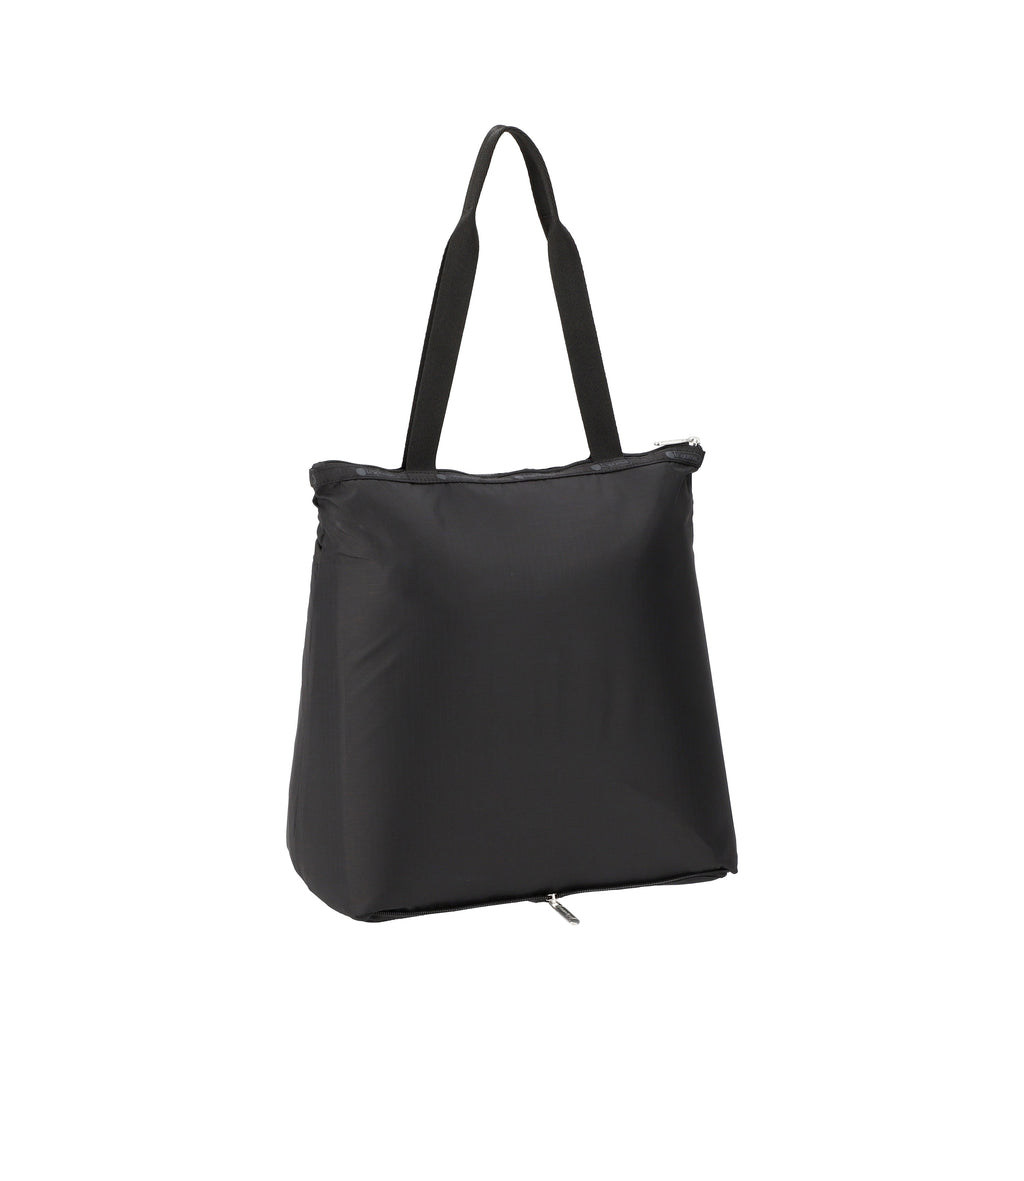 Packable North/South - Black solid | LeSportsac